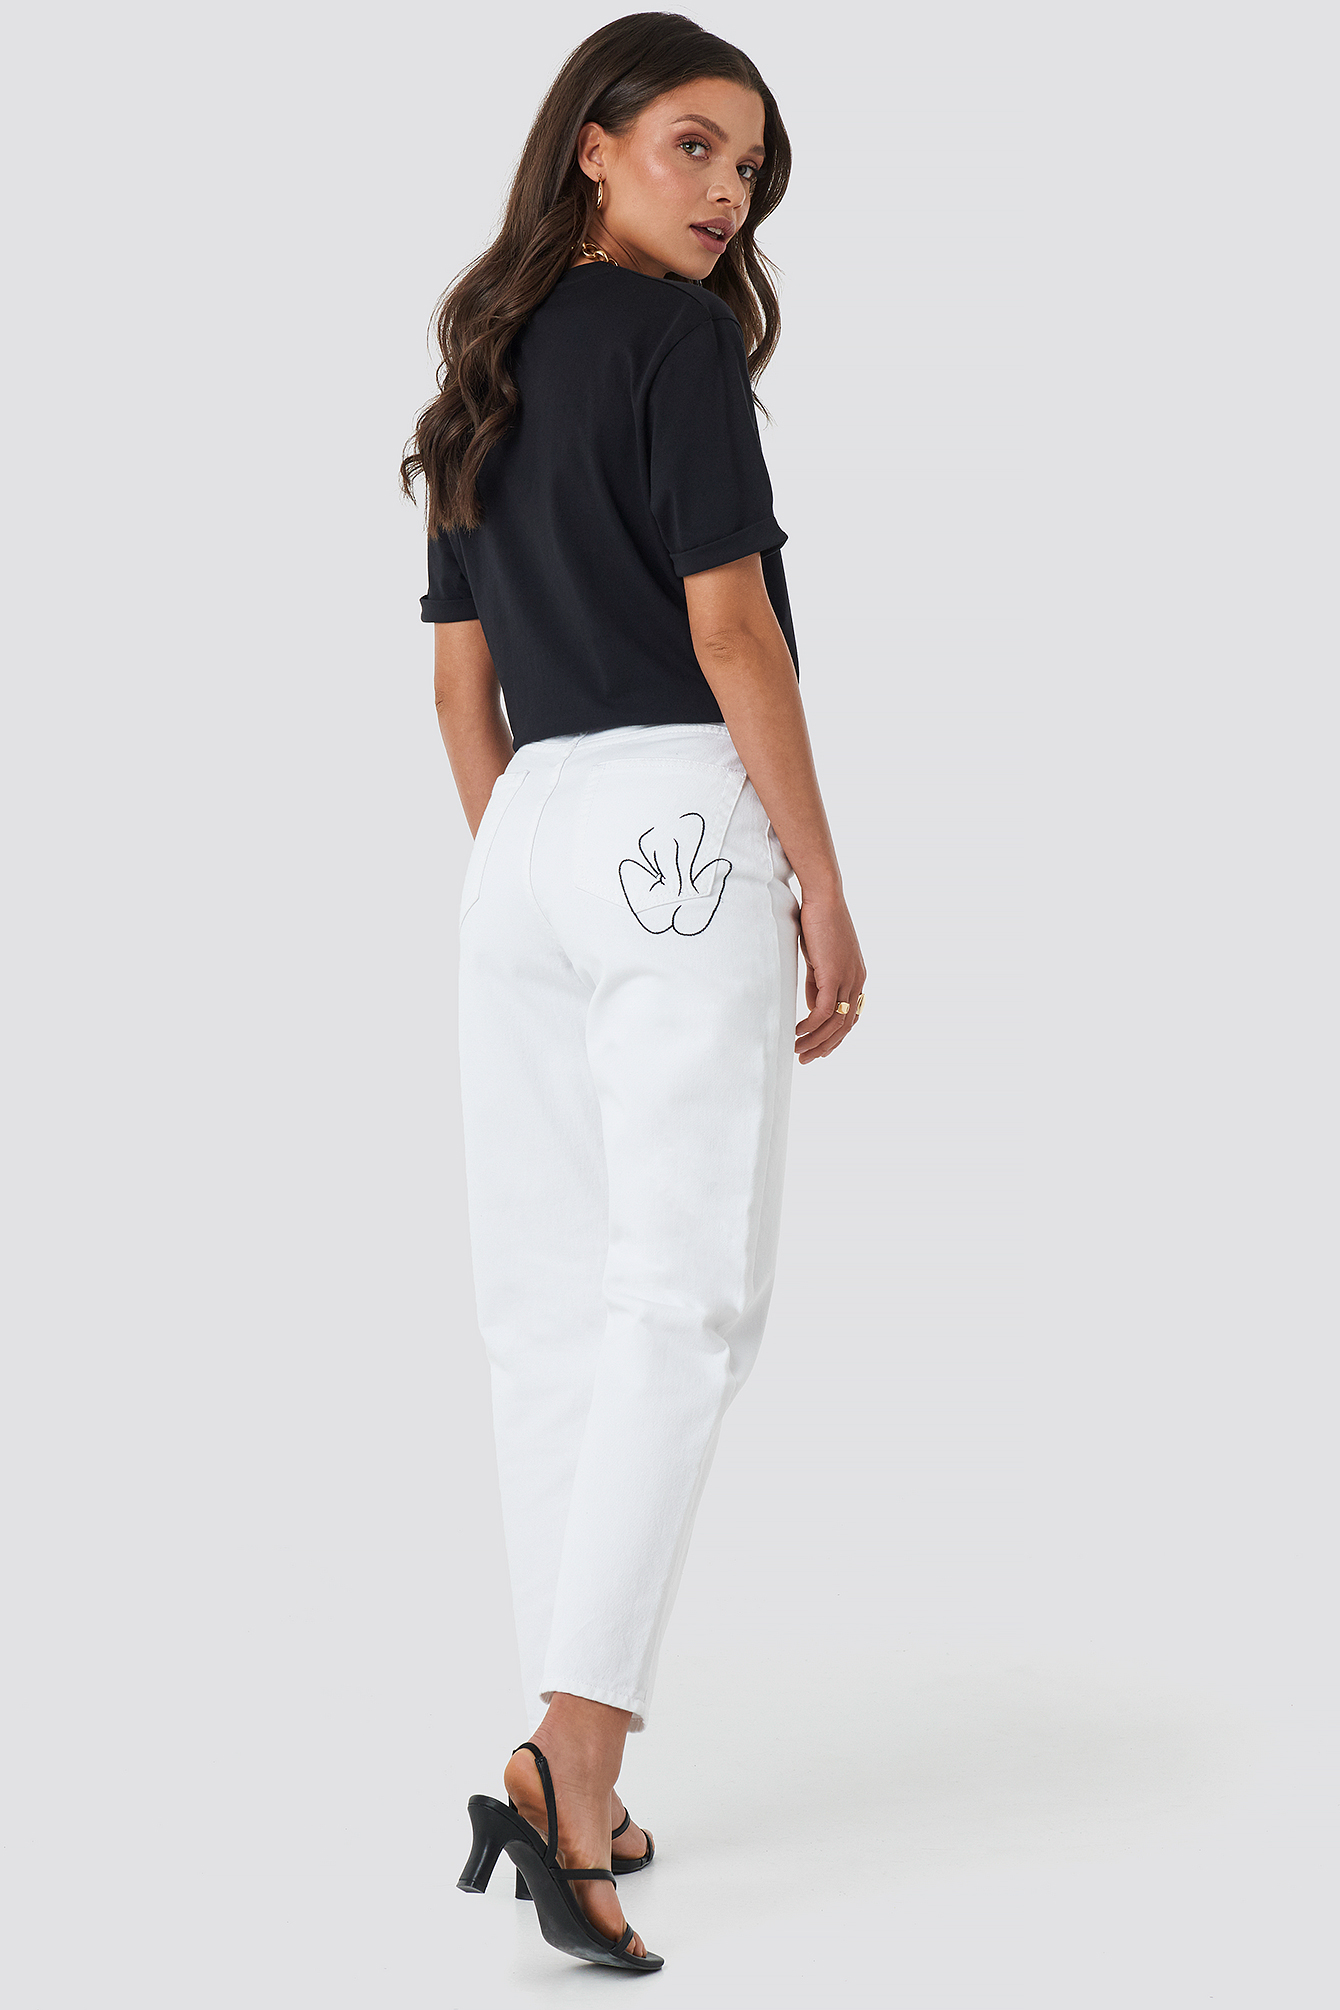 White Pocket Embroidered Jeans